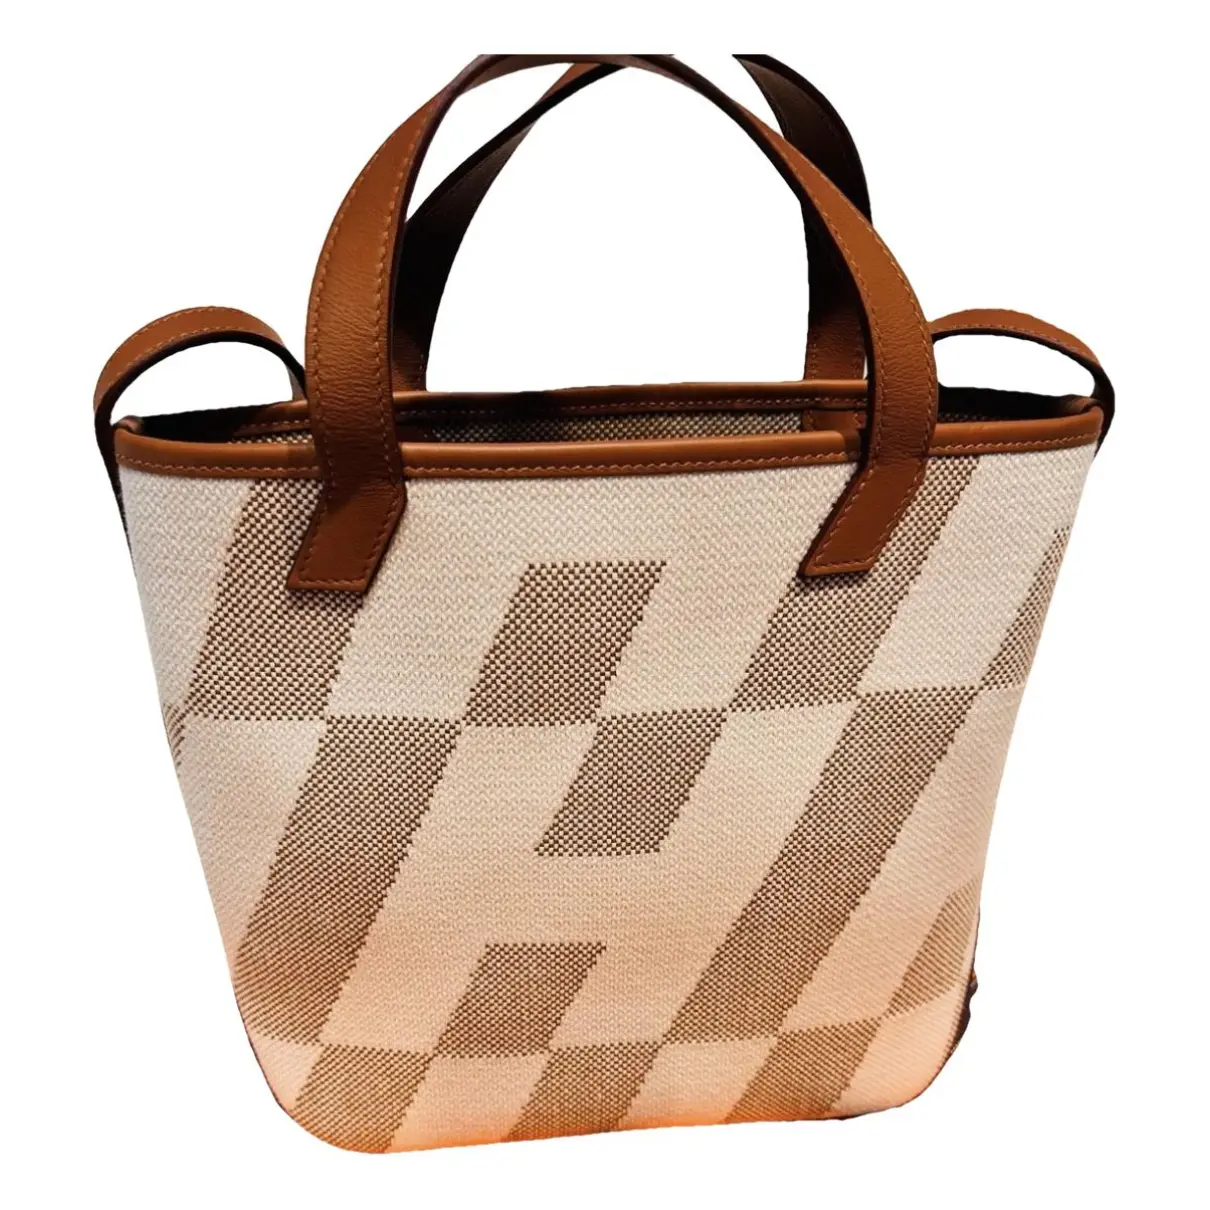 H leather tote